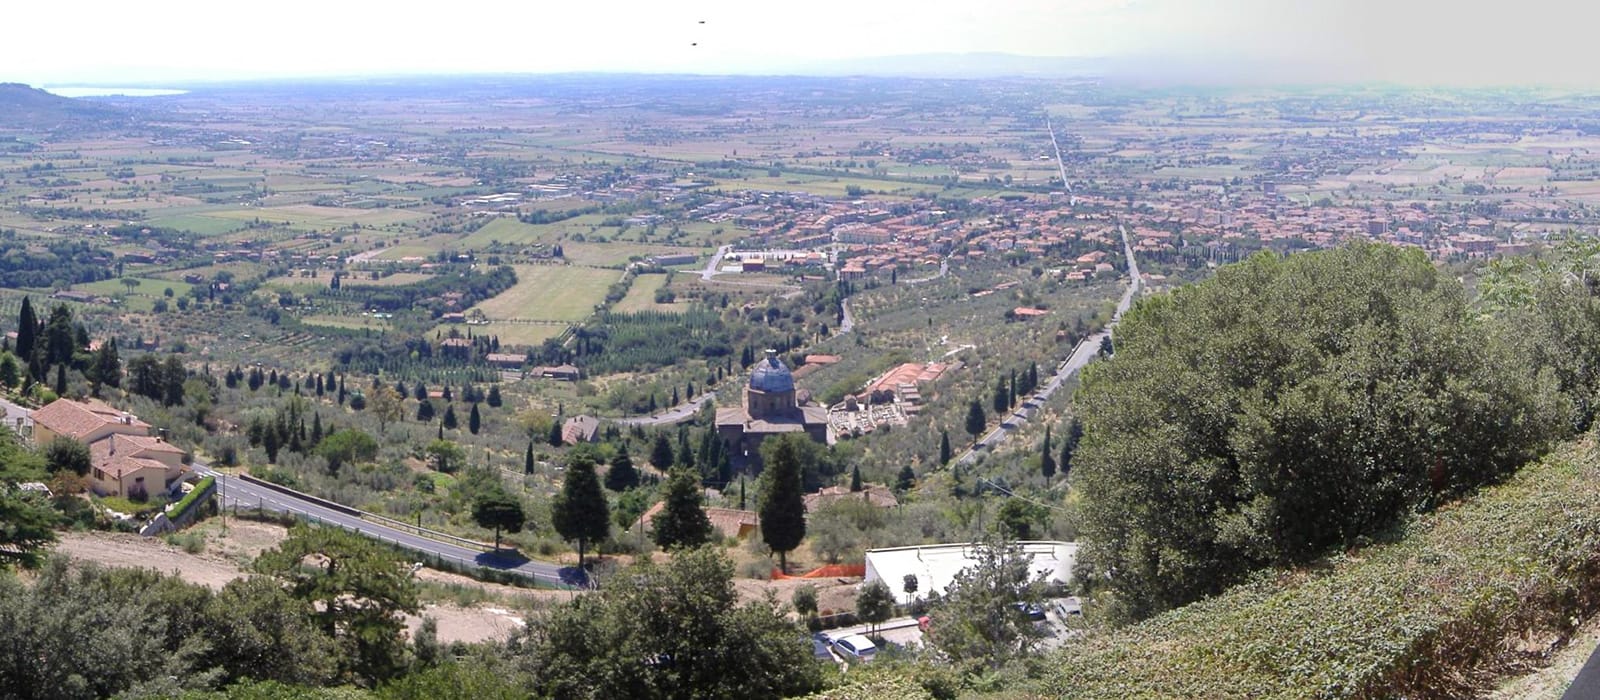 What to see in the surroundings of Agriturismo Pratovalle near Cortona